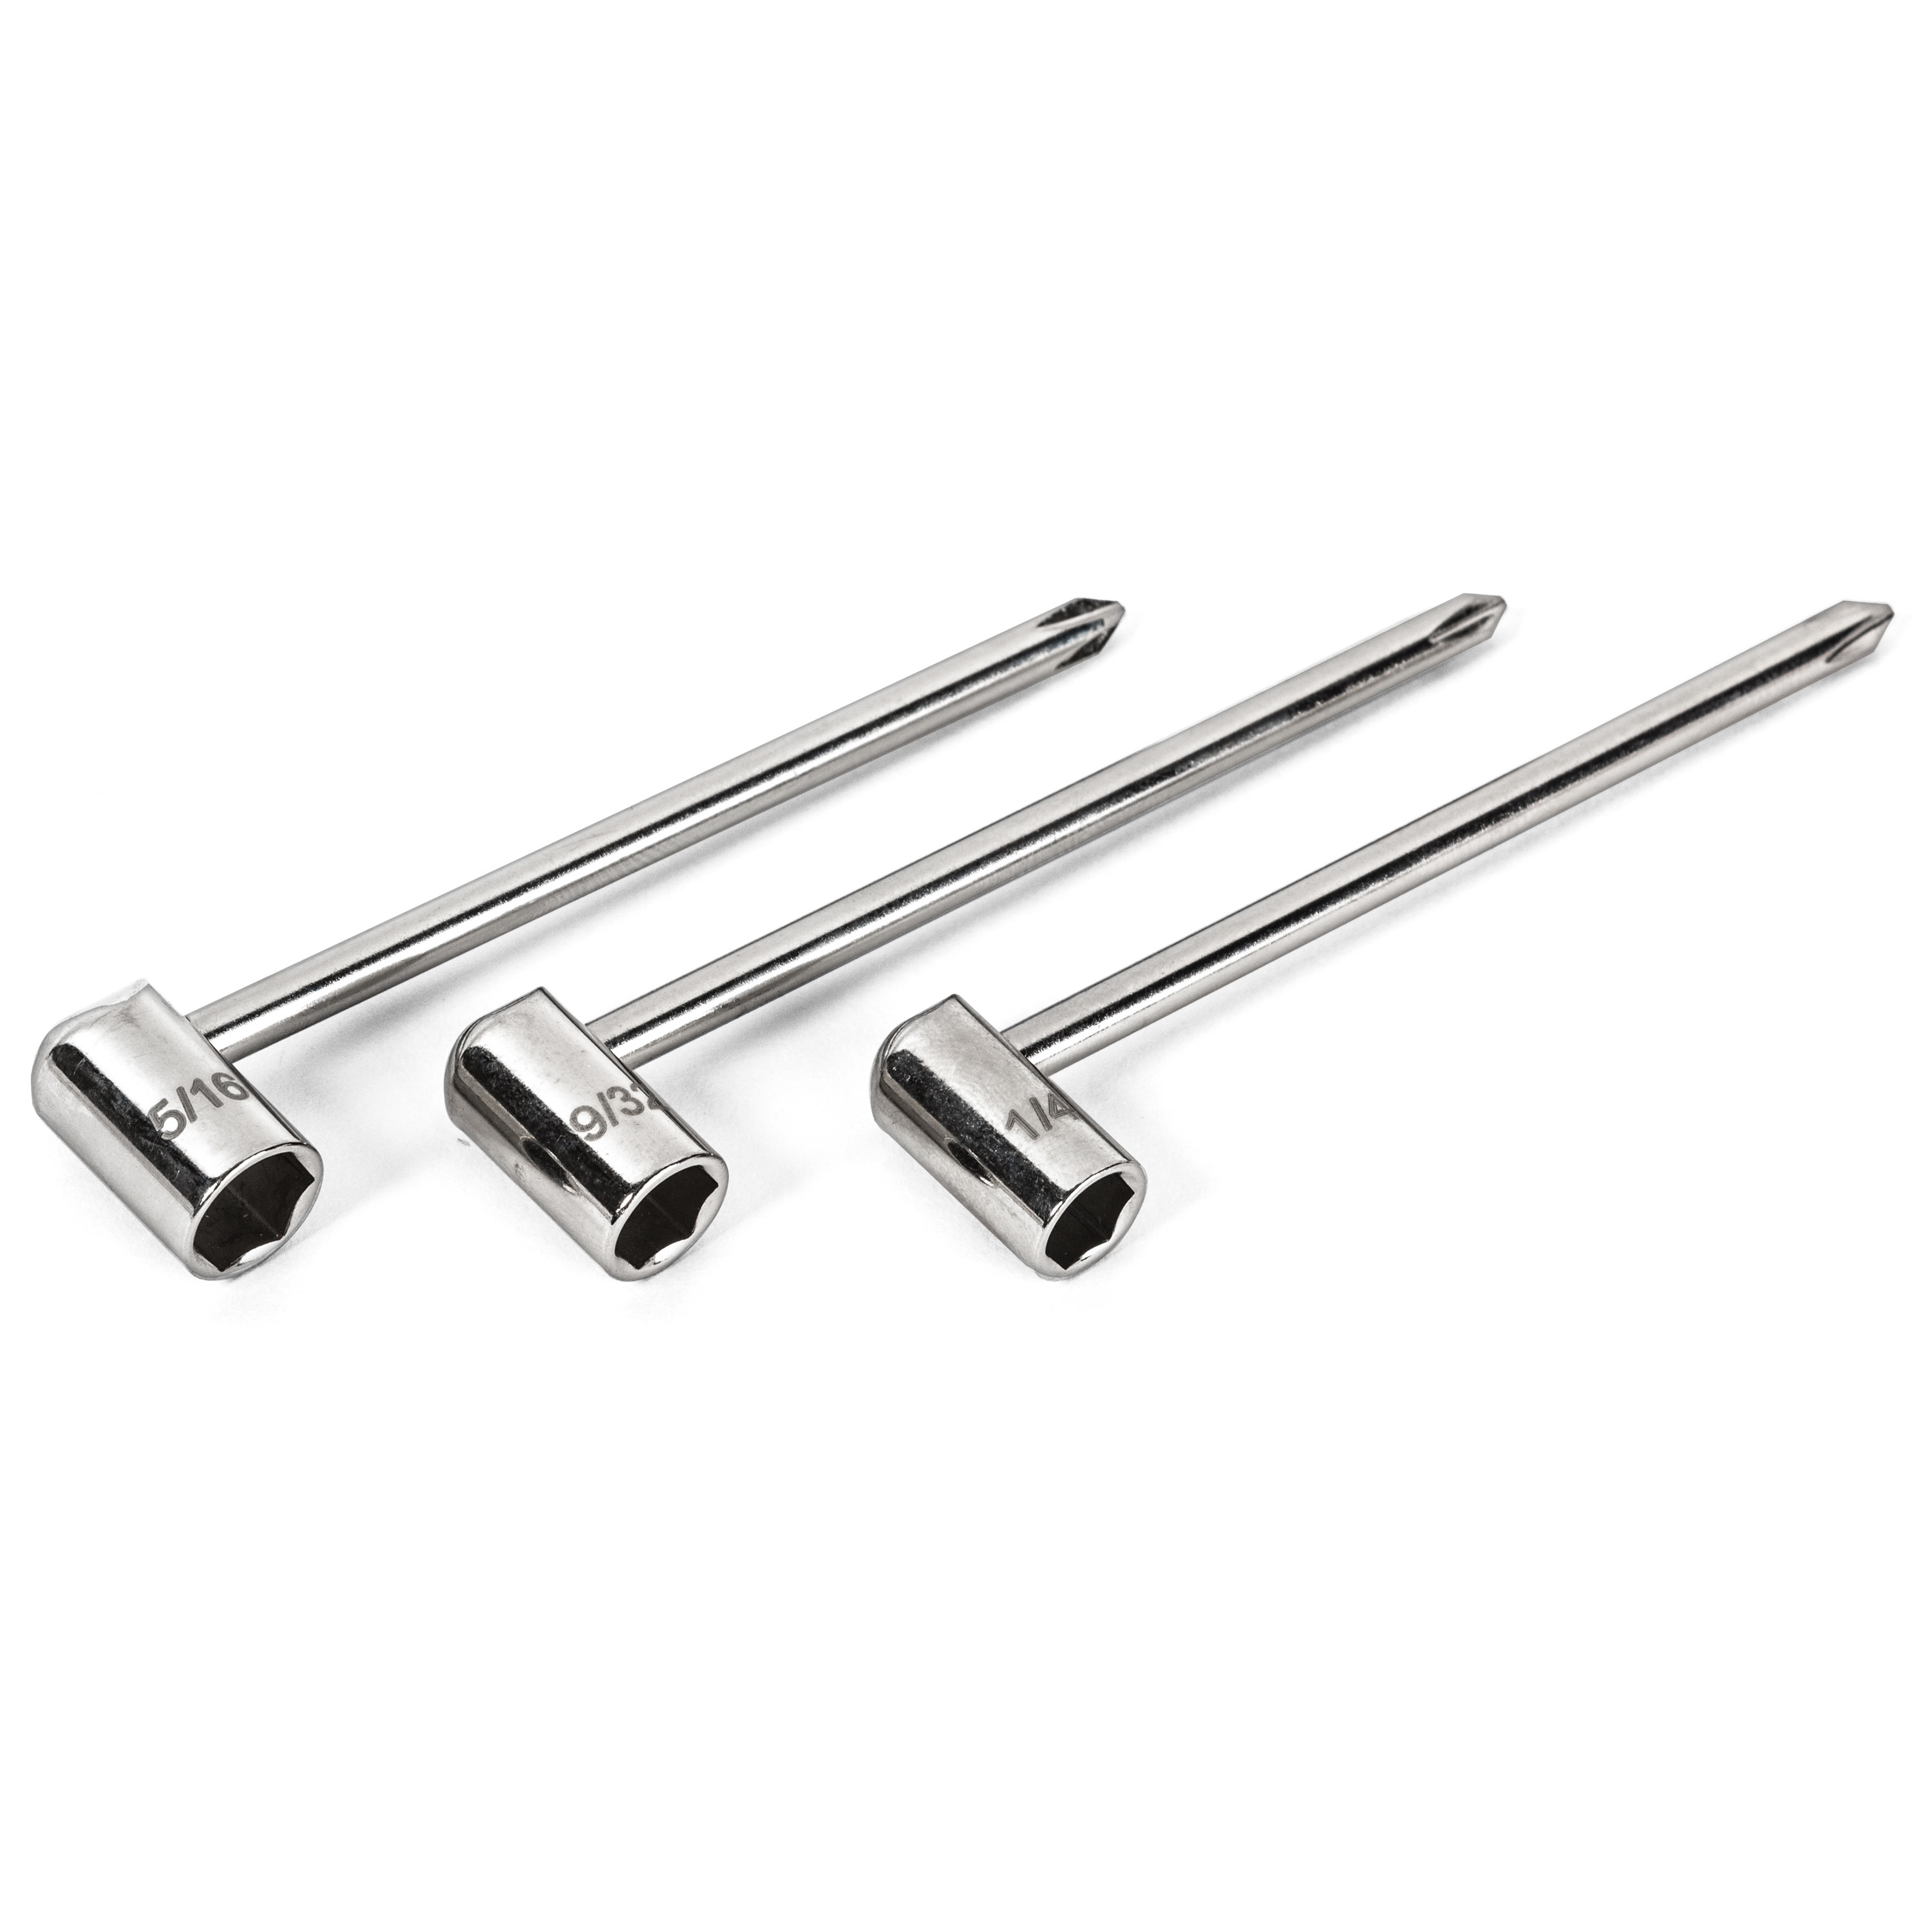 Pocket Truss Rod Wrenches